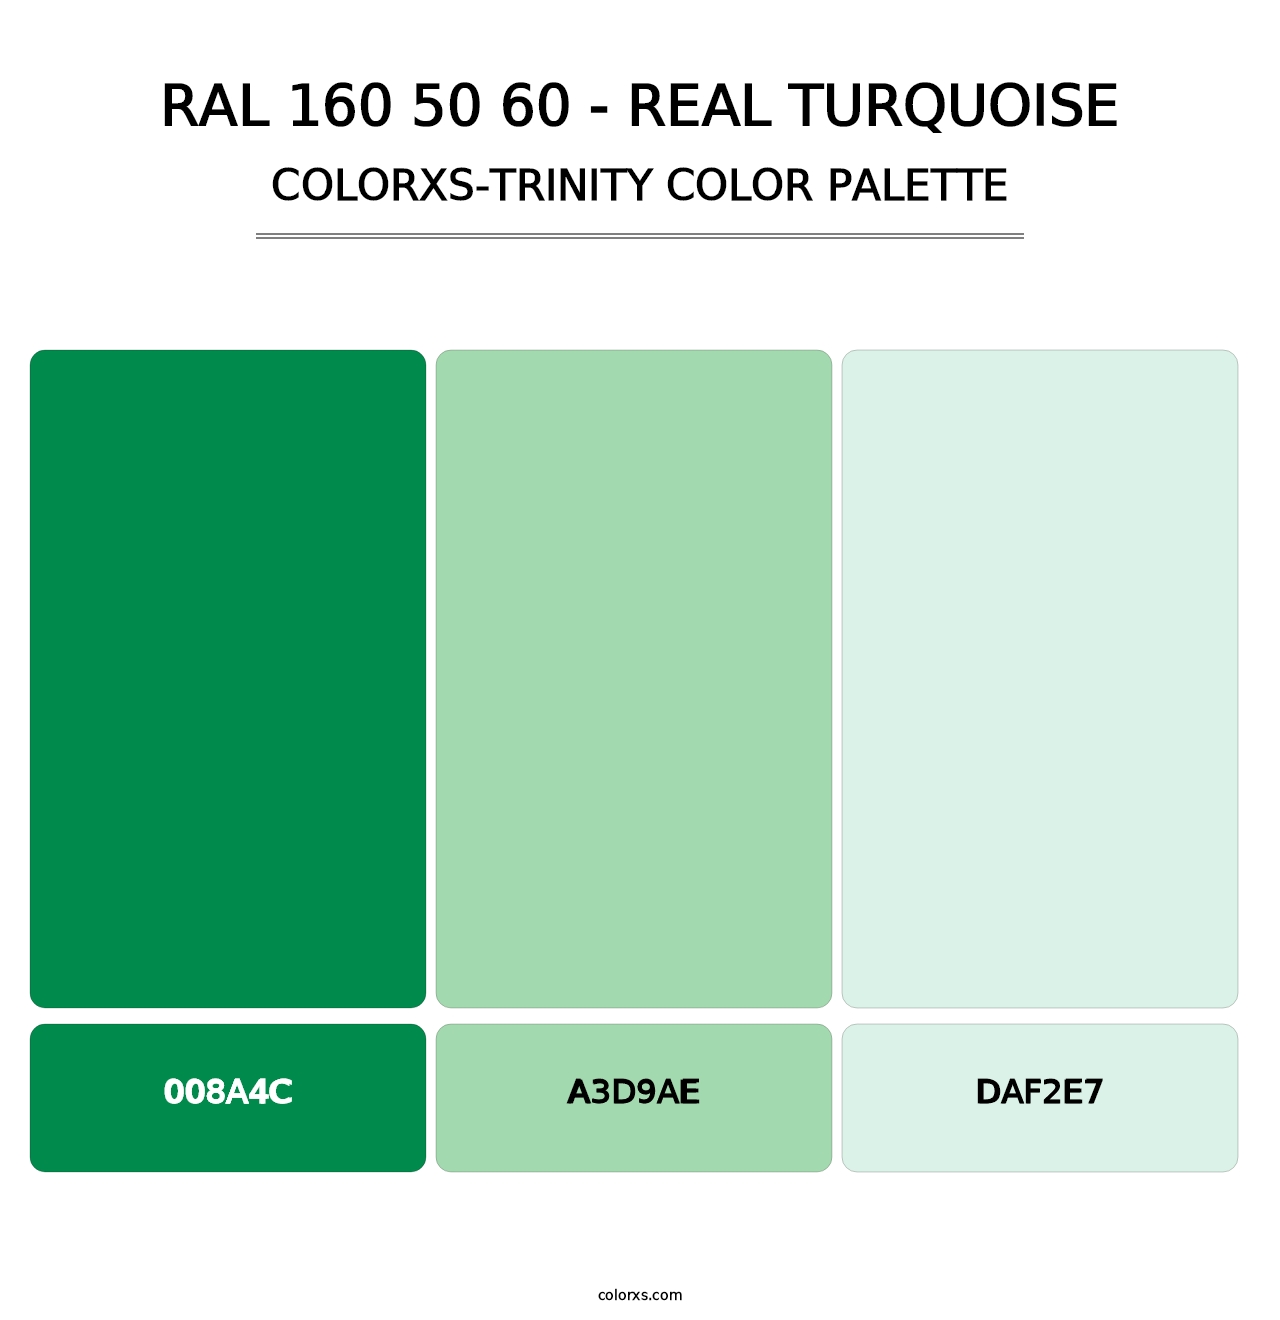 RAL 160 50 60 - Real Turquoise - Colorxs Trinity Palette